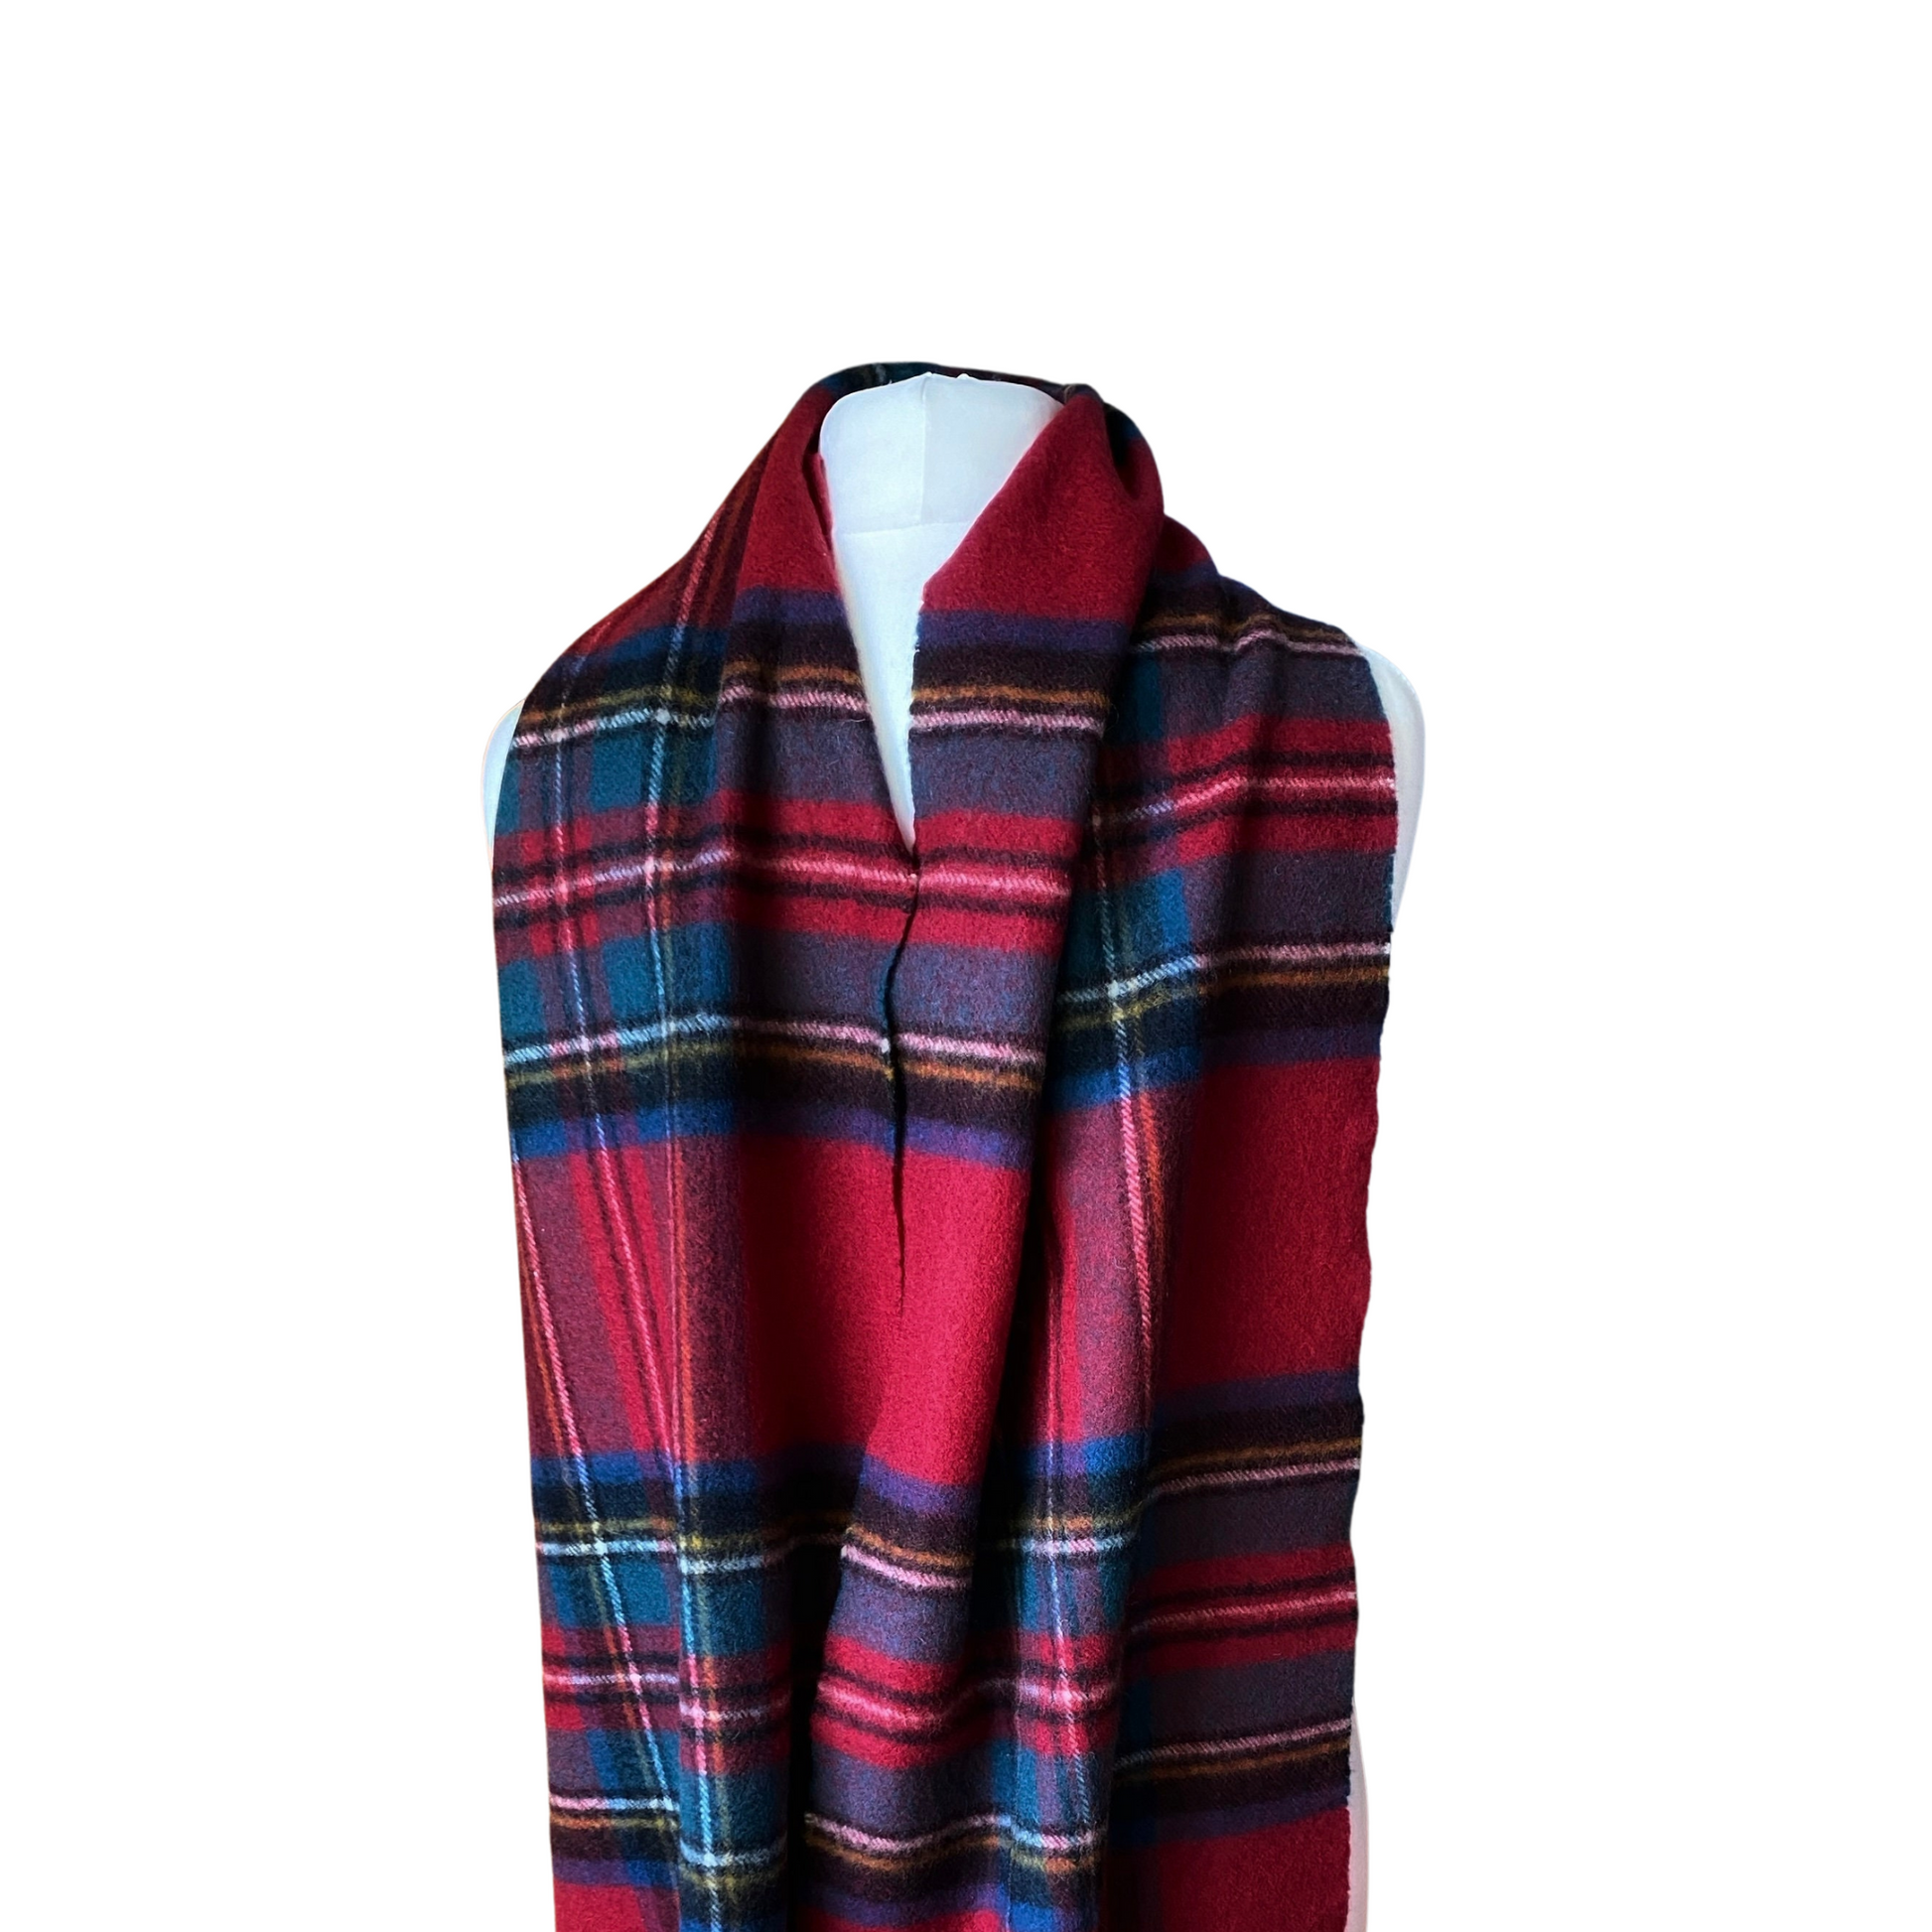 Large vintage plaid scarf - Warm and cosy  accessory for chilly days